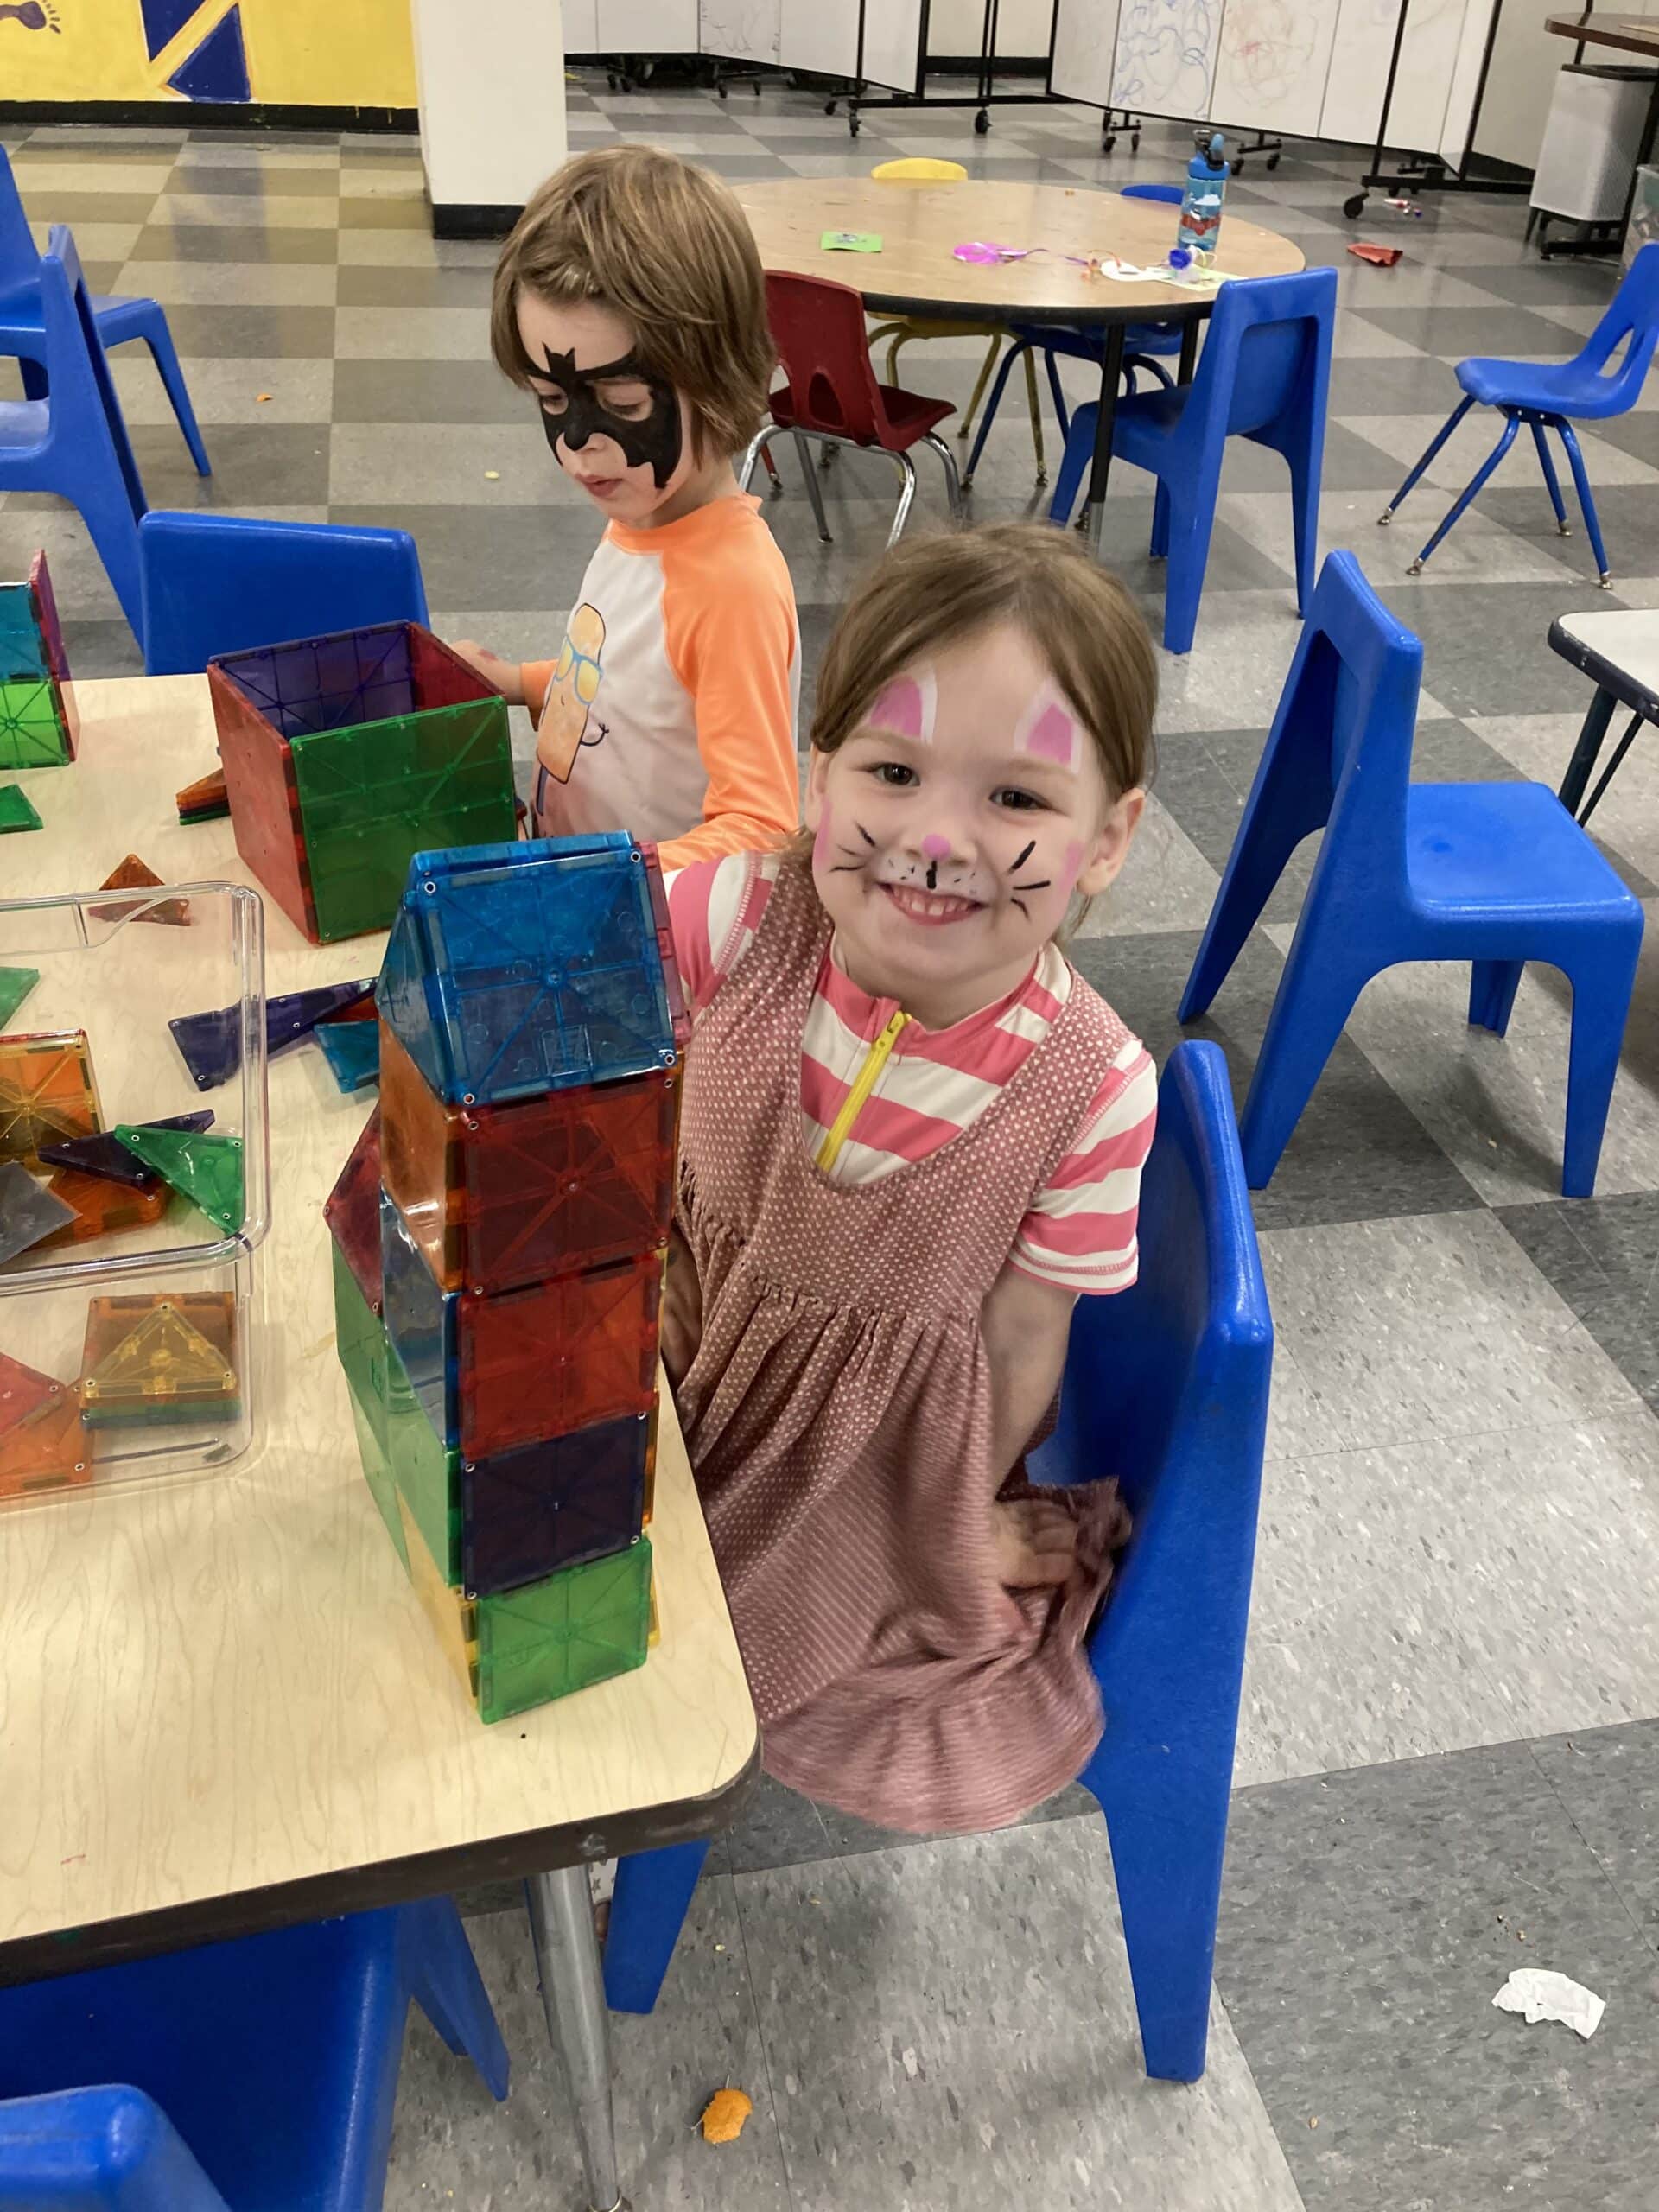 Young girl with painted face shows off her creation she built from colorful see-through squares